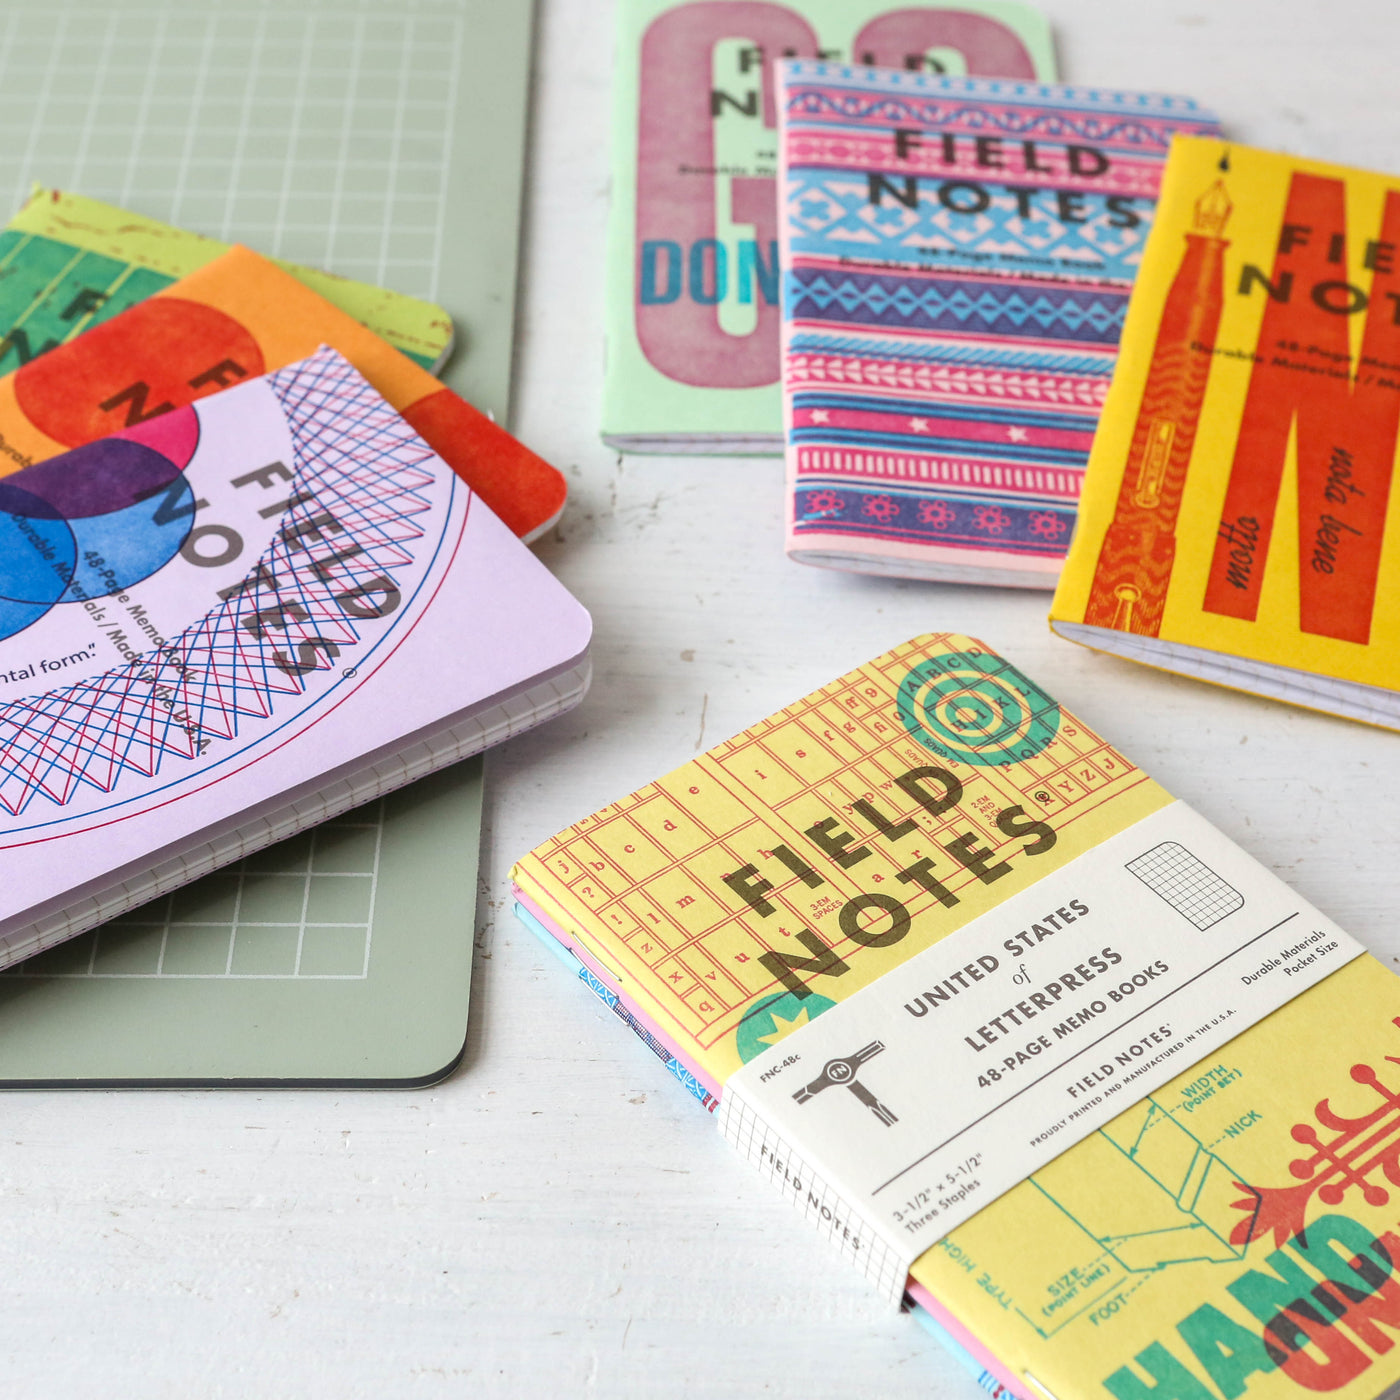 Field Notes 3-Pack - United States of Letterpress